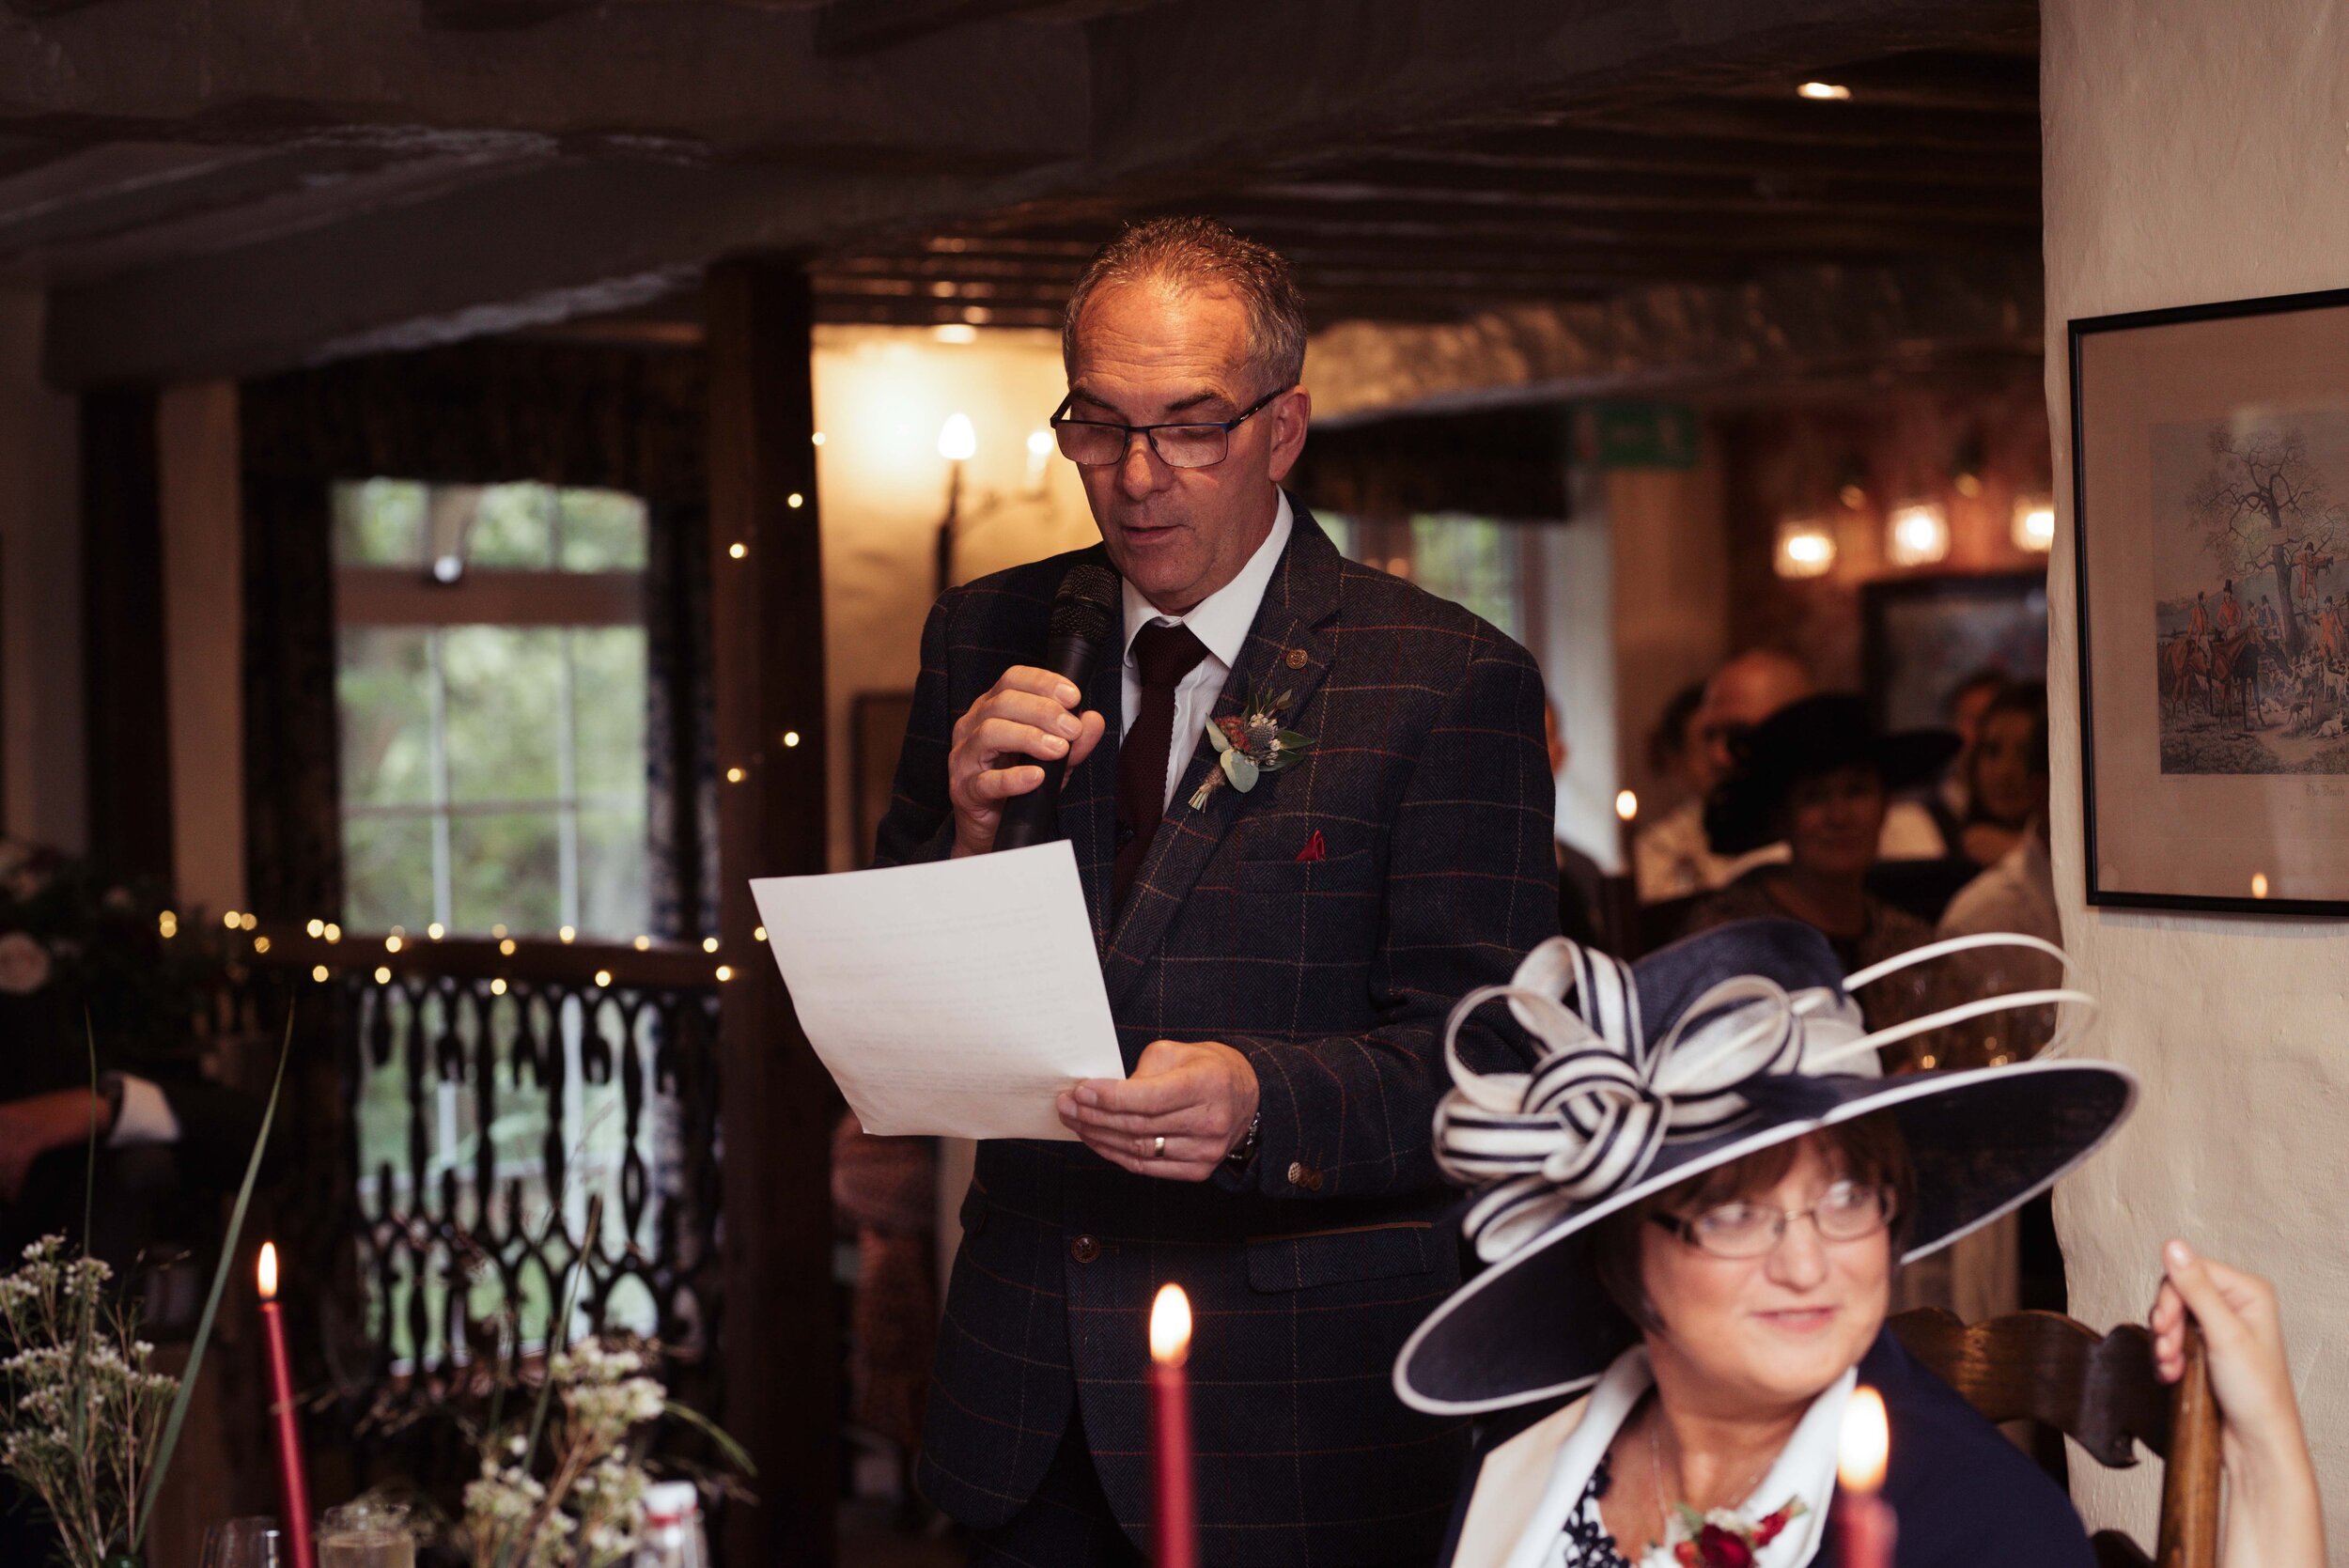 Father of the bride giving his speech